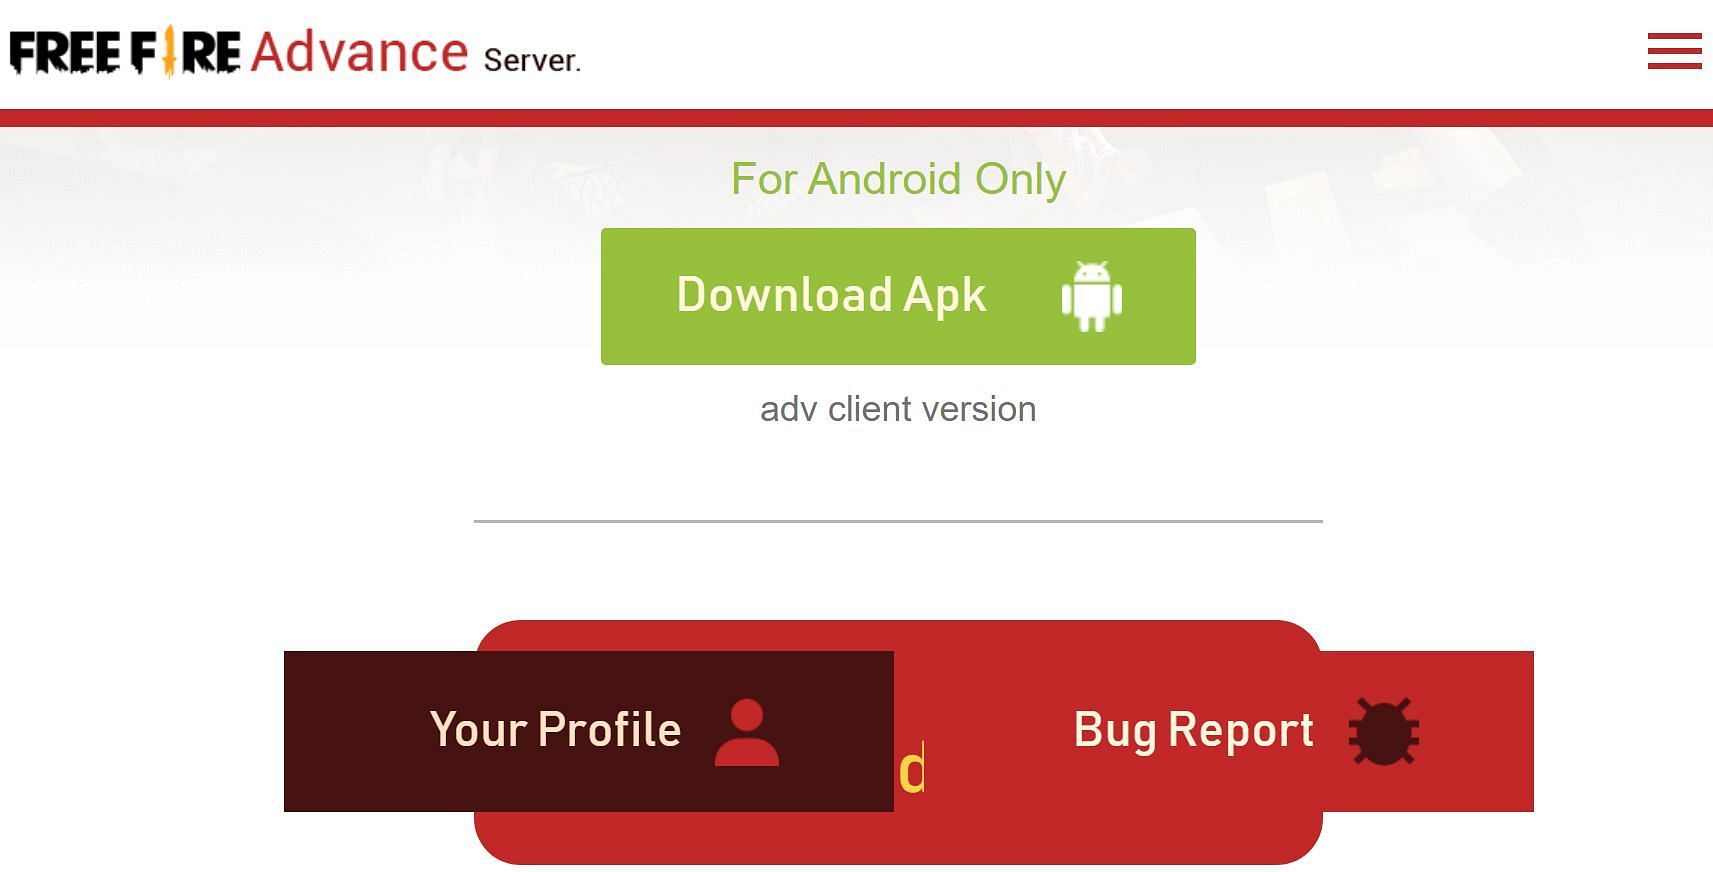 Users can access the APK link after successfully registering for the Advance Server (Image via Garena)